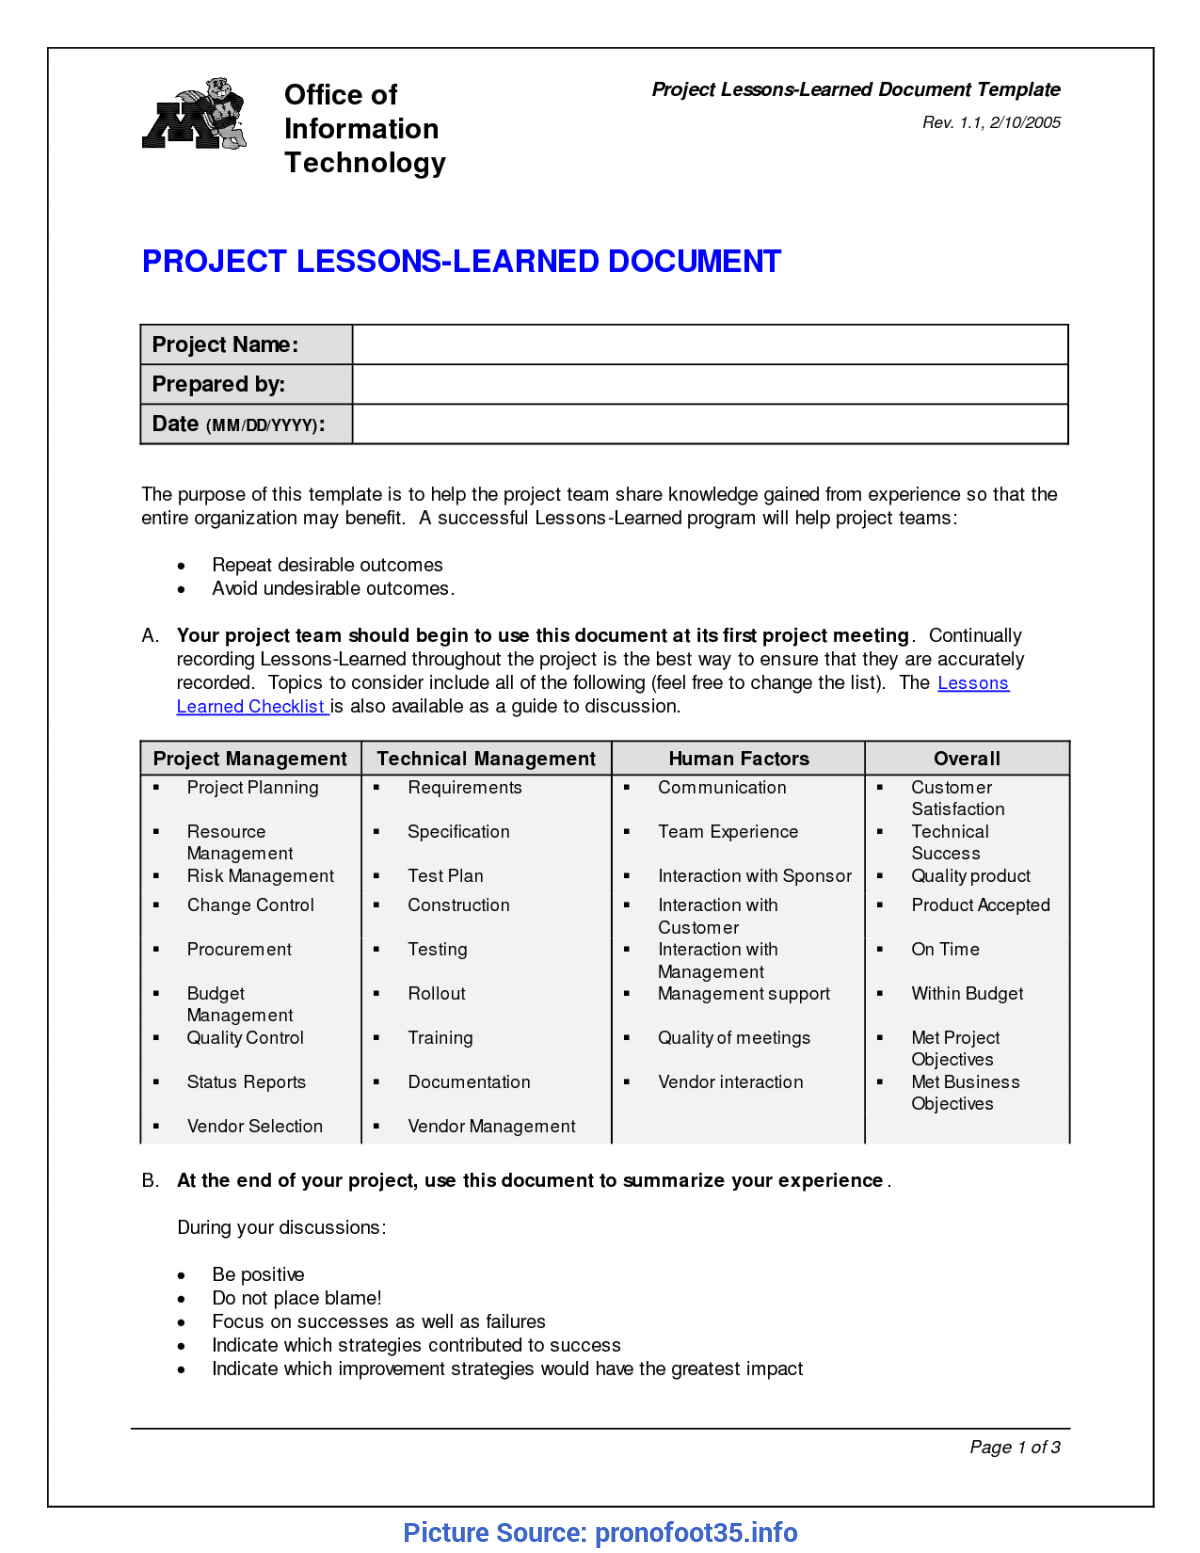 Fresh Project Management Lessons Learned Report Lessons For Lessons Learnt Report Template